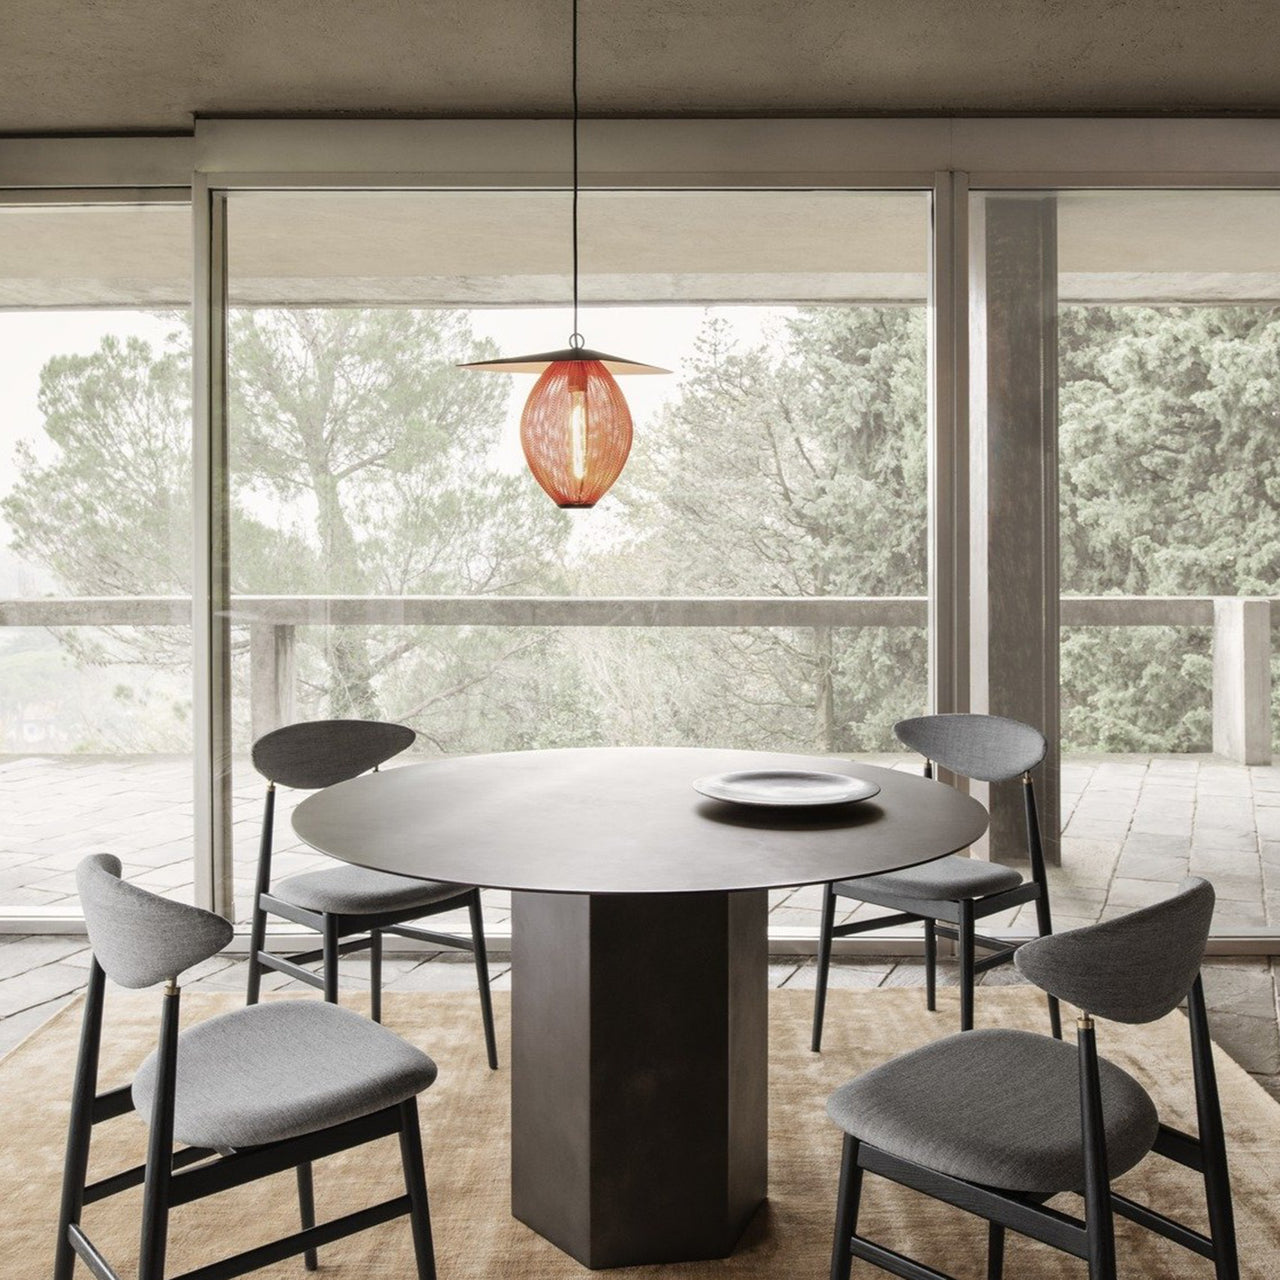 Epic Round Dining Table: Steel